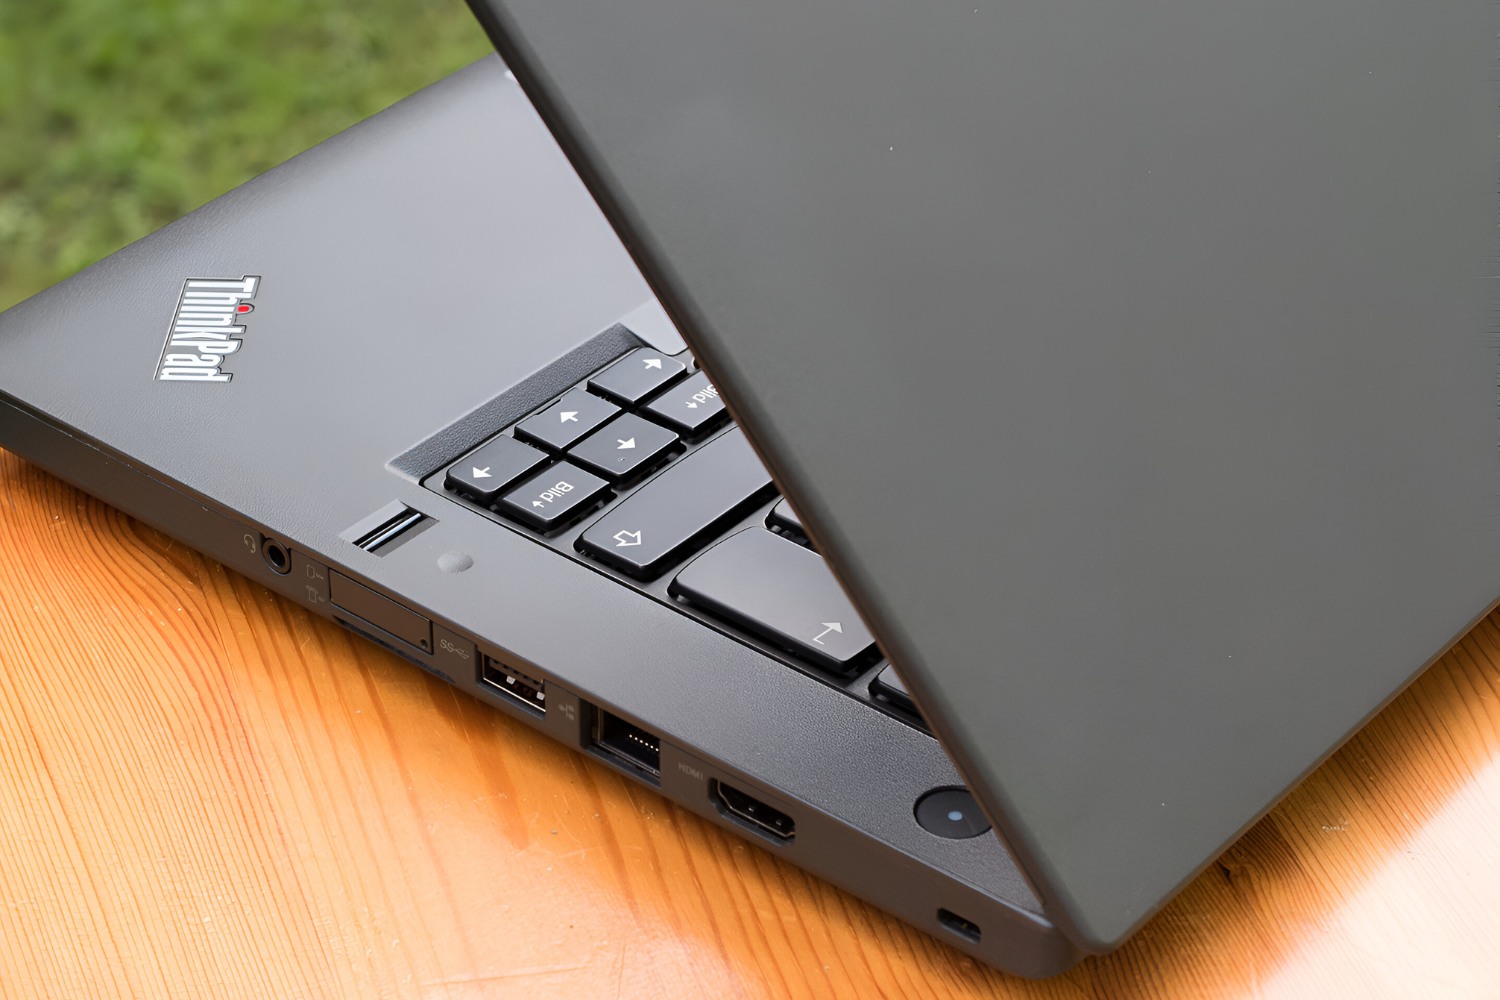 what-are-the-additions-that-change-the-price-of-the-lenovo-t460-ultrabook